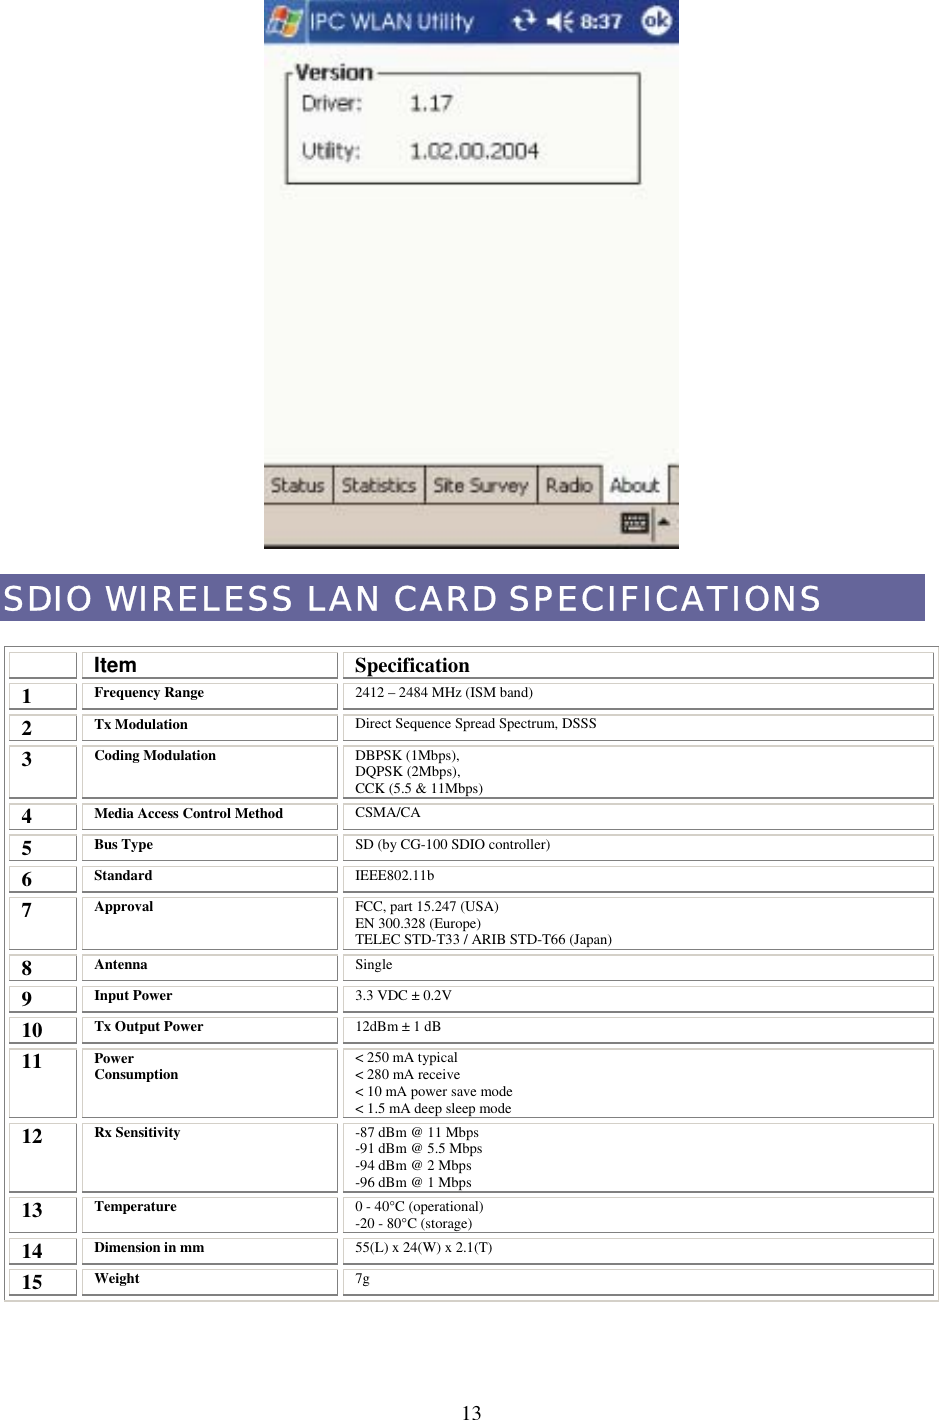  SDIO WIRELESS LAN CARD SPECIFICATIONS  Item  Specification 1  Frequency Range 2412 – 2484 MHz (ISM band) 2  Tx Modulation Direct Sequence Spread Spectrum, DSSS 3  Coding Modulation DBPSK (1Mbps), DQPSK (2Mbps), CCK (5.5 &amp; 11Mbps) 4  Media Access Control Method CSMA/CA 5  Bus Type SD (by CG-100 SDIO controller) 6  Standard IEEE802.11b 7  Approval FCC, part 15.247 (USA) EN 300.328 (Europe) TELEC STD-T33 / ARIB STD-T66 (Japan) 8  Antenna Single 9  Input Power 3.3 VDC ± 0.2V 10  Tx Output Power 12dBm ± 1 dB 11  Power Consumption &lt; 250 mA typical &lt; 280 mA receive &lt; 10 mA power save mode &lt; 1.5 mA deep sleep mode 12  Rx Sensitivity -87 dBm @ 11 Mbps -91 dBm @ 5.5 Mbps -94 dBm @ 2 Mbps -96 dBm @ 1 Mbps 13  Temperature 0 - 40°C (operationa ) l-20 - 80°C (storage) 14  Dimension in mm 55(L) x 24(W) x 2.1(T) 15  Weight 7g  13